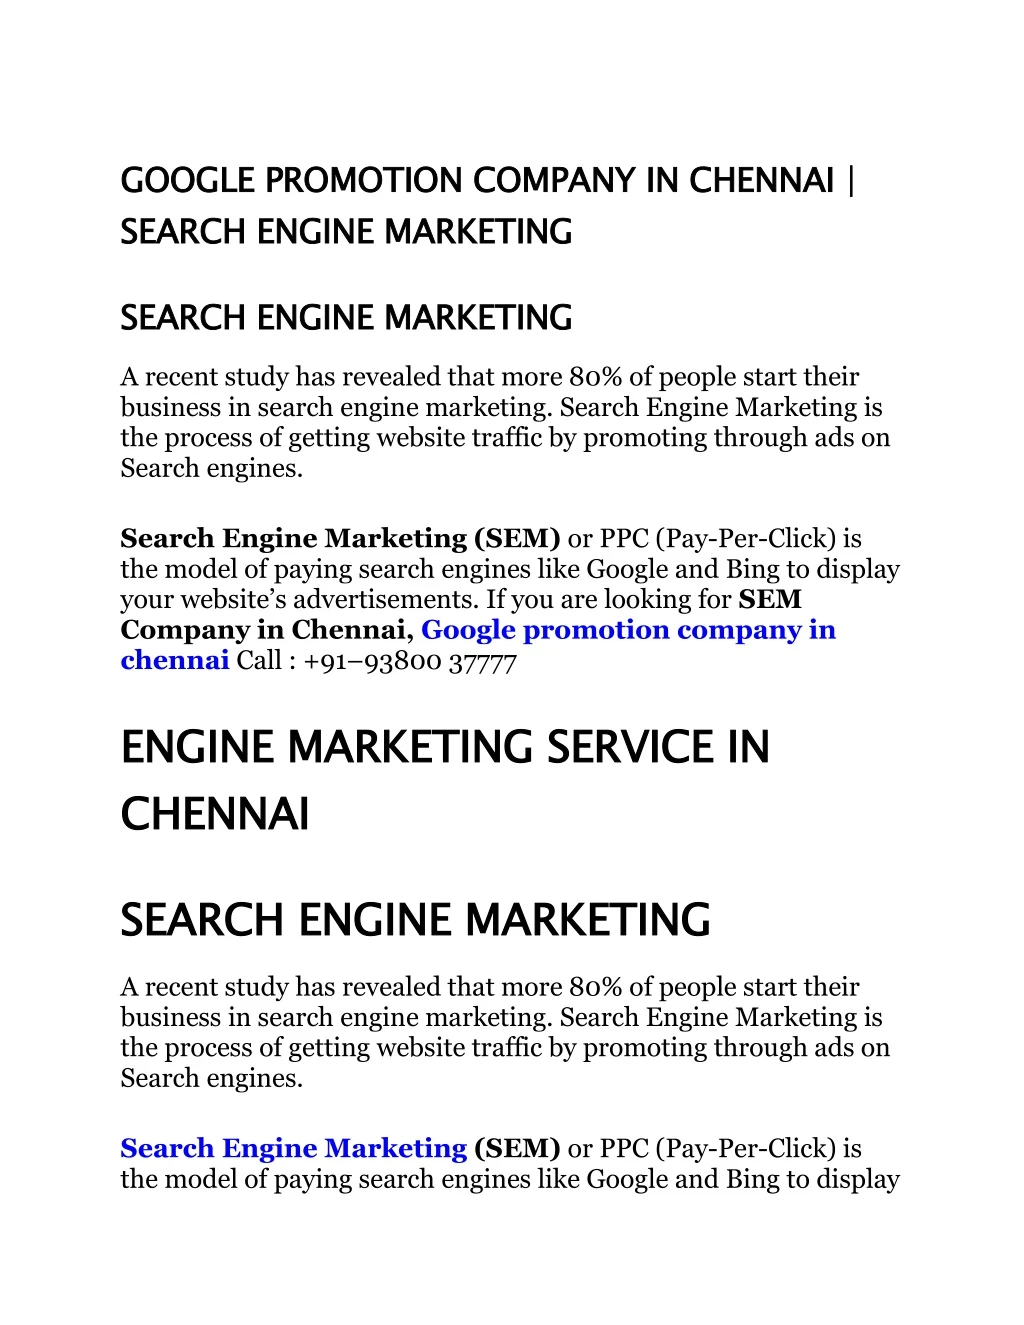 google promotion company in chennai search engine